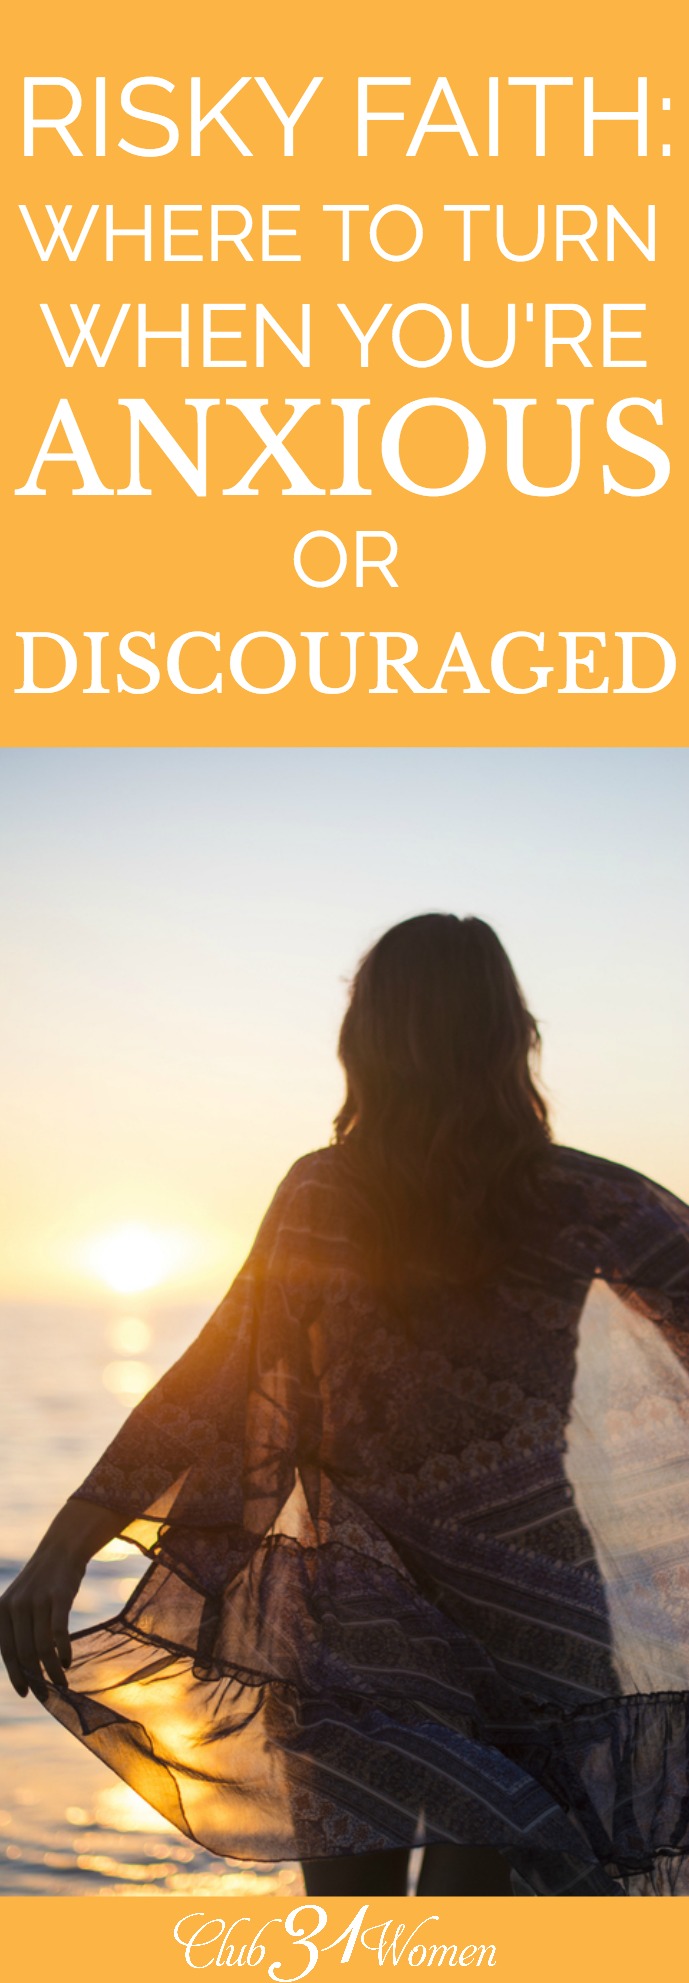 When you feel stuck, anxious, or discouraged, seek the Lord for peace and direction and step out into a faith that is risky, yet brings growth. via @Club31Women